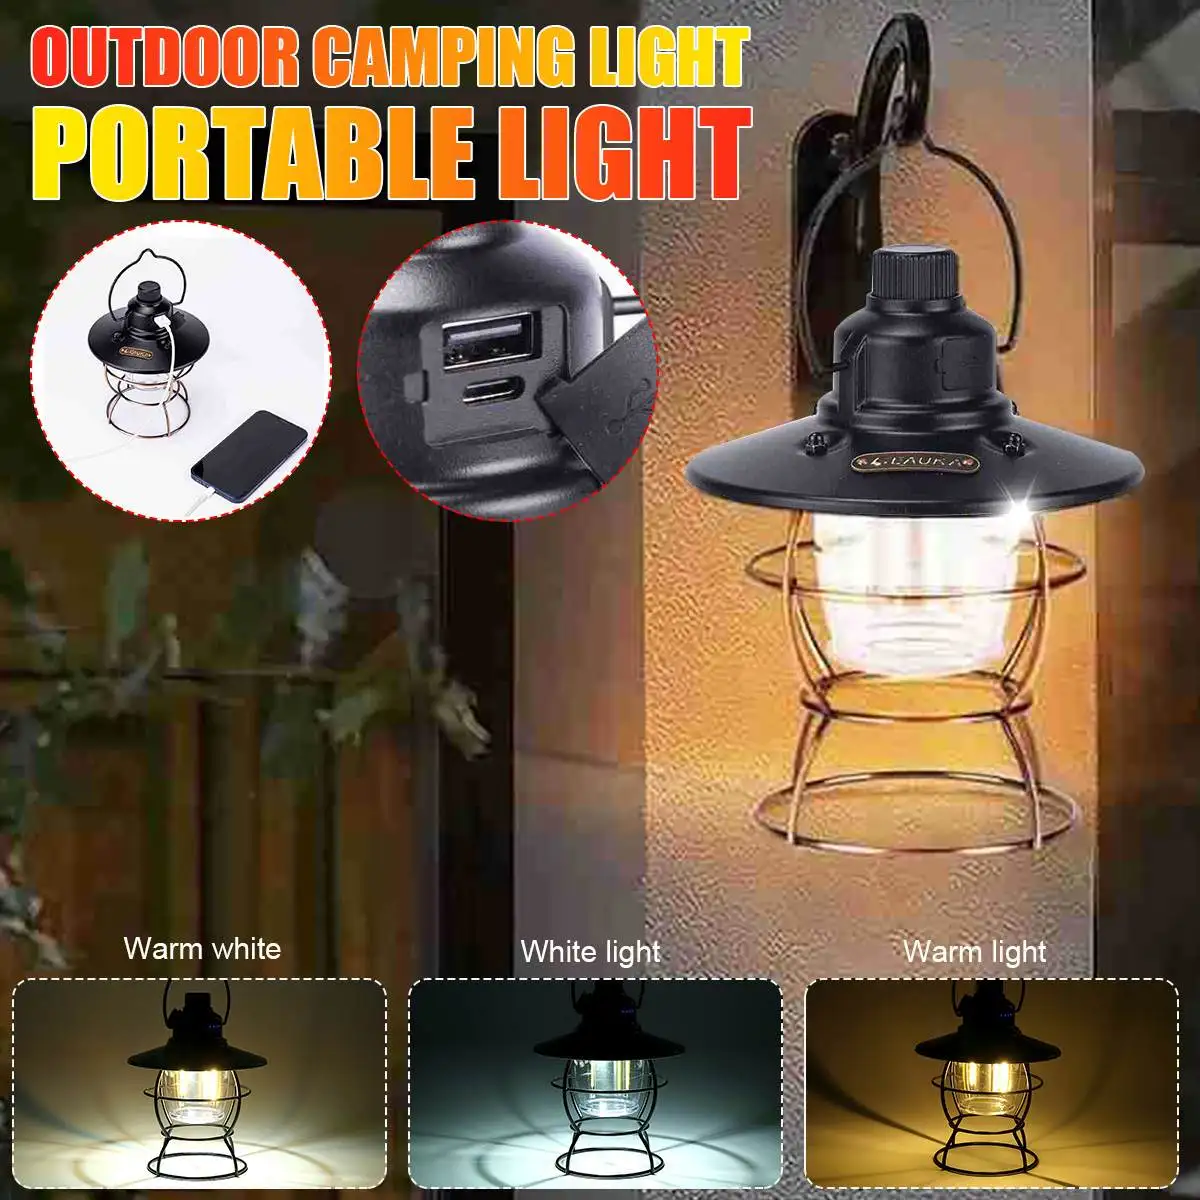 

50W Portable Lantern USB Rechargeable LED Bulb Portable Light Outdoor Camping Light Household 3 Modes Power Bank Flashlight